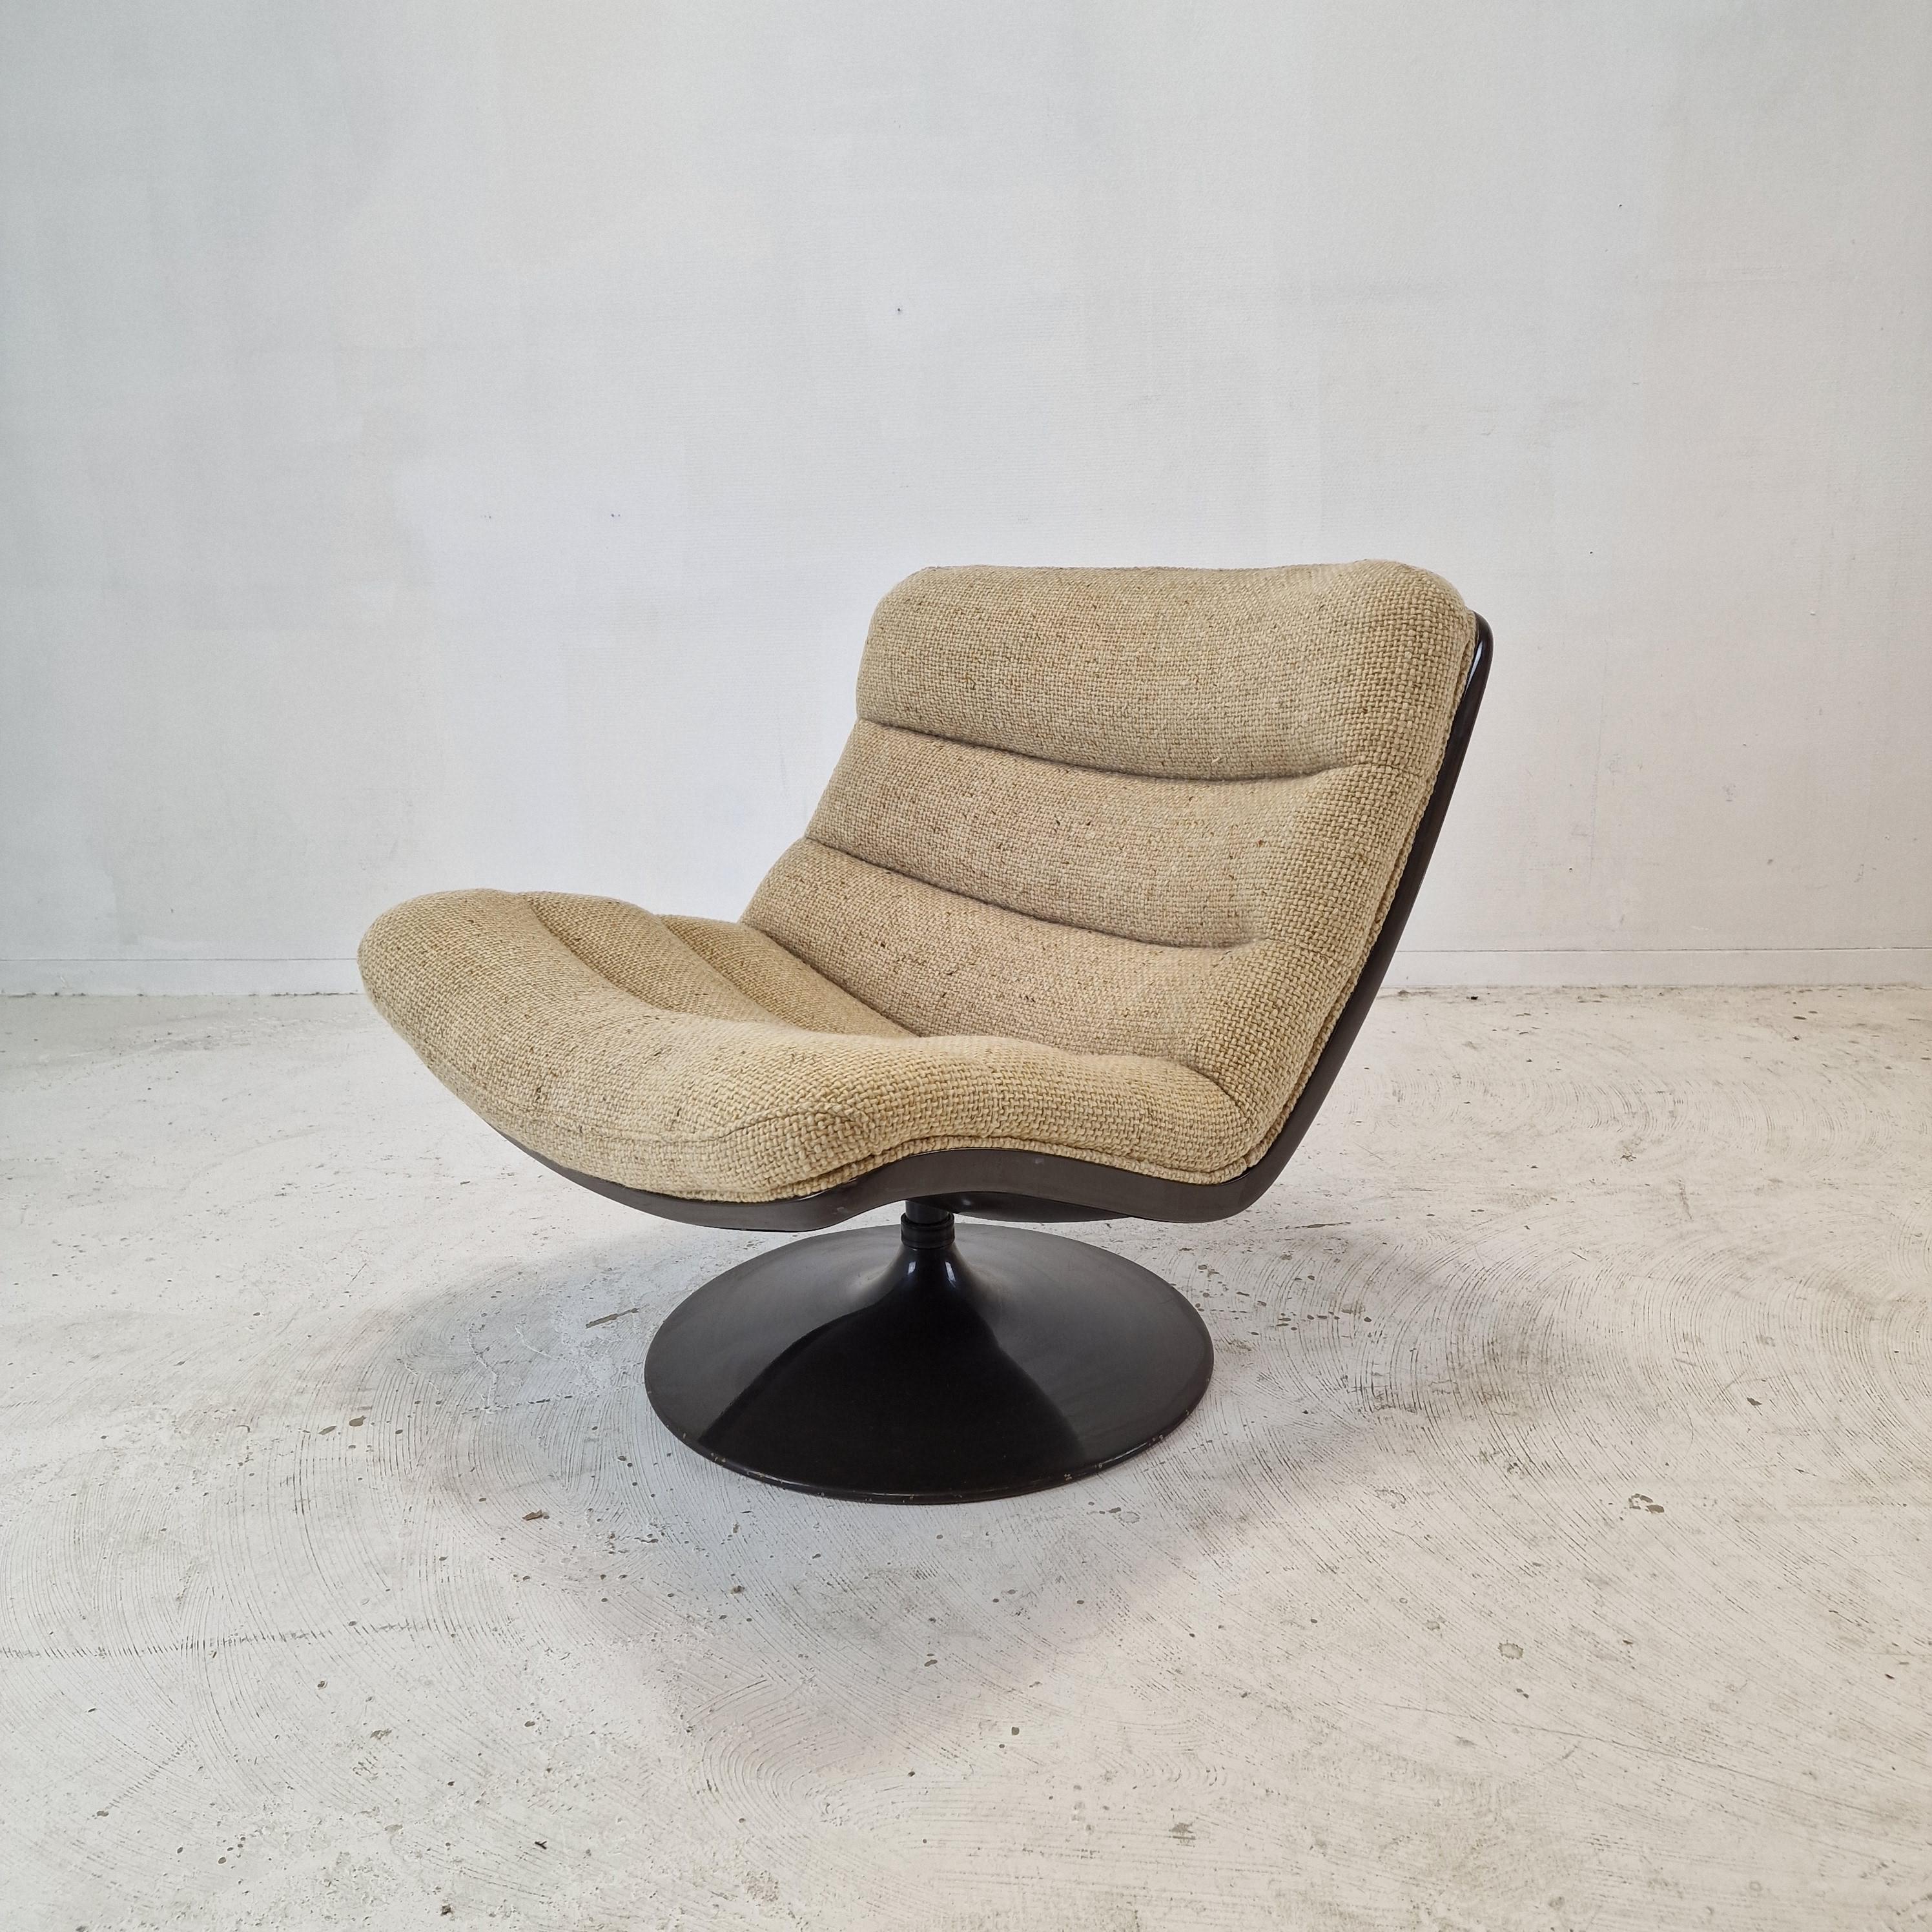 Set of 2 975 Lounge Chair by Geoffrey Harcourt for Artifort, 1970s For Sale 4